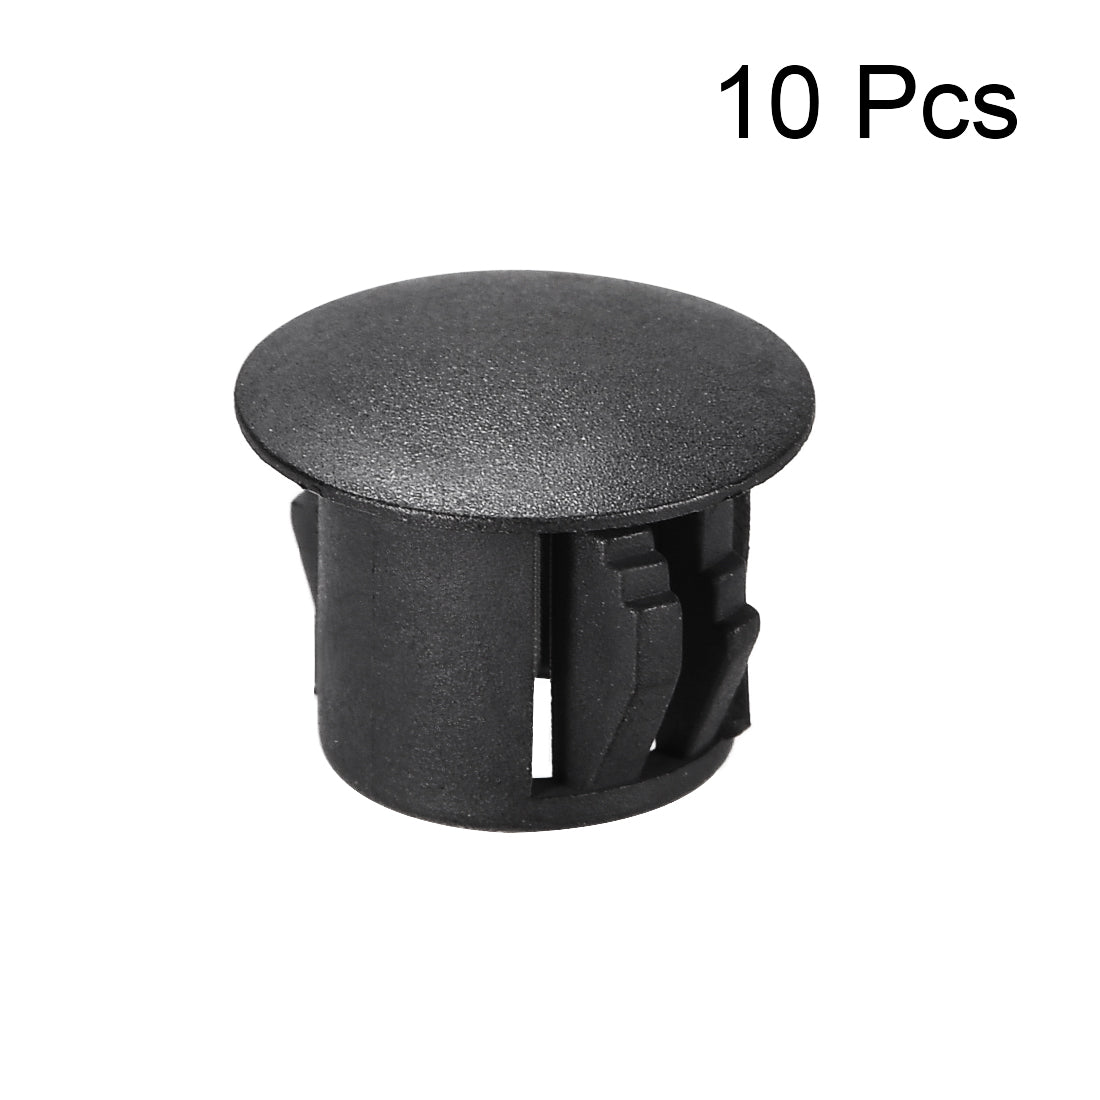 uxcell Uxcell 10pcs Mounting 10mm x 11mm Black Nylon Round Snap Panel Locking Hole Plugs Cover